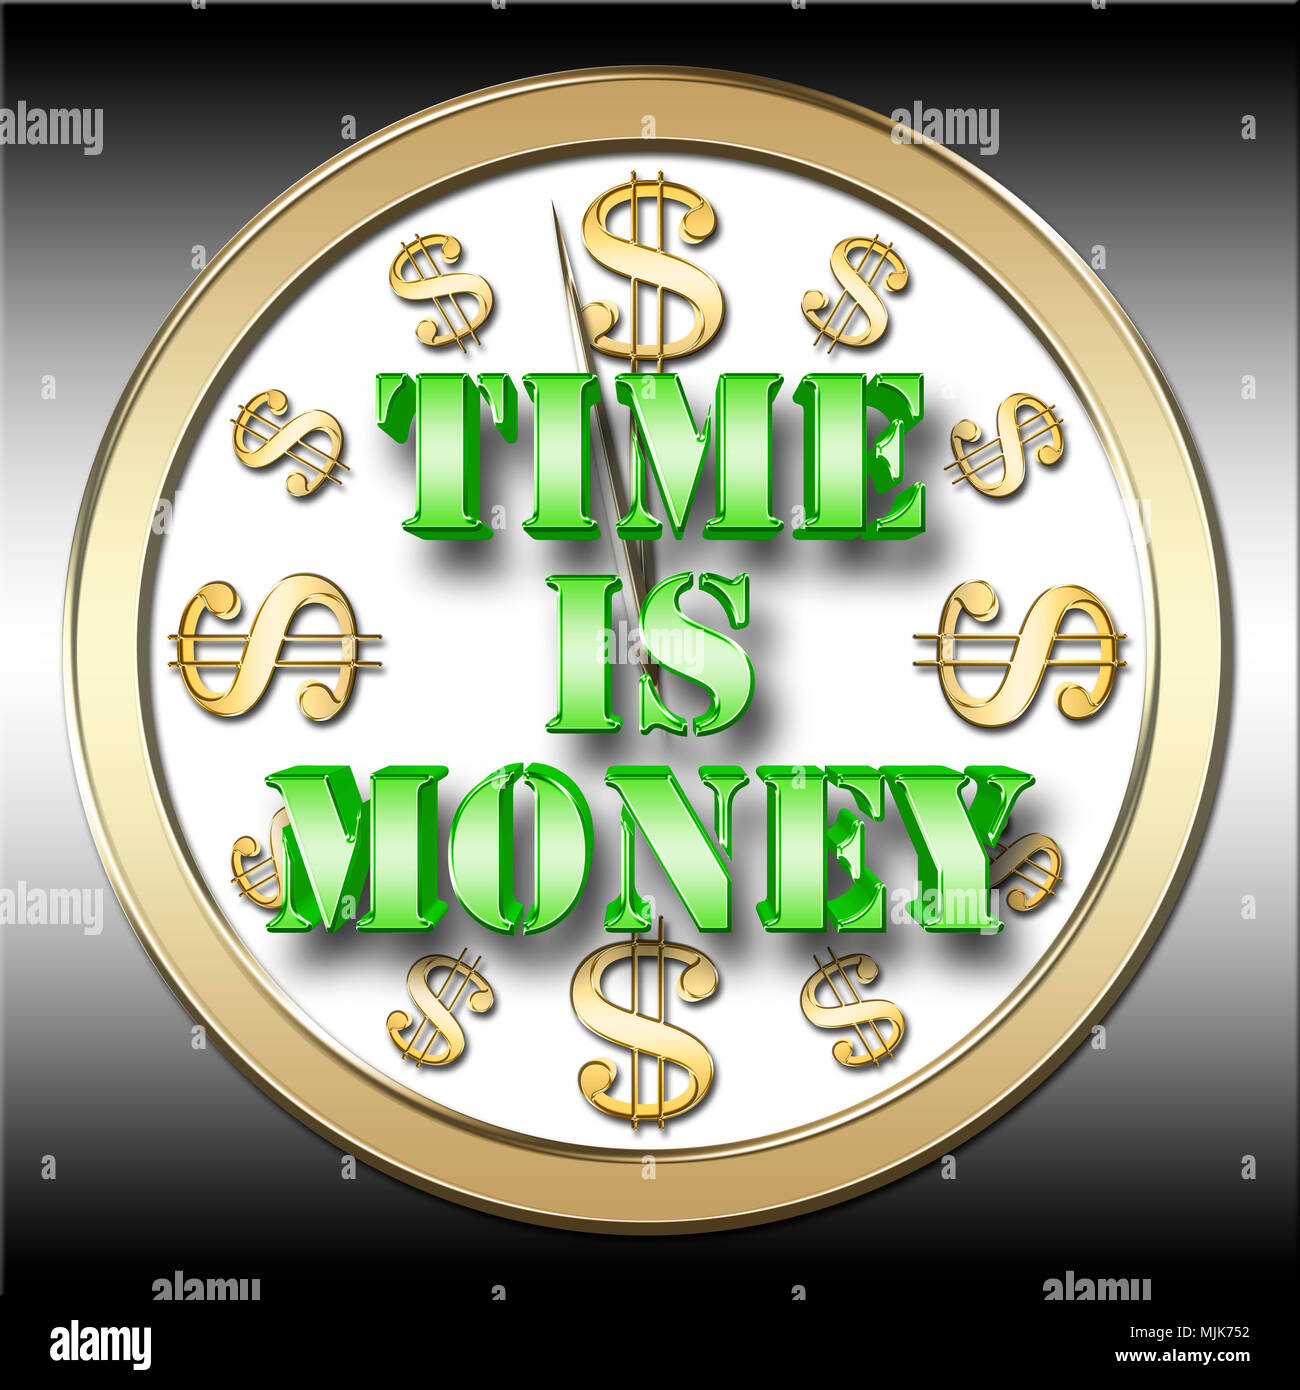 Stock Illustration - Shiny Metallic Green Text: TIME IS MONEY, 3D Illustration, Isolated Against the Gradient Background. Stock Photo